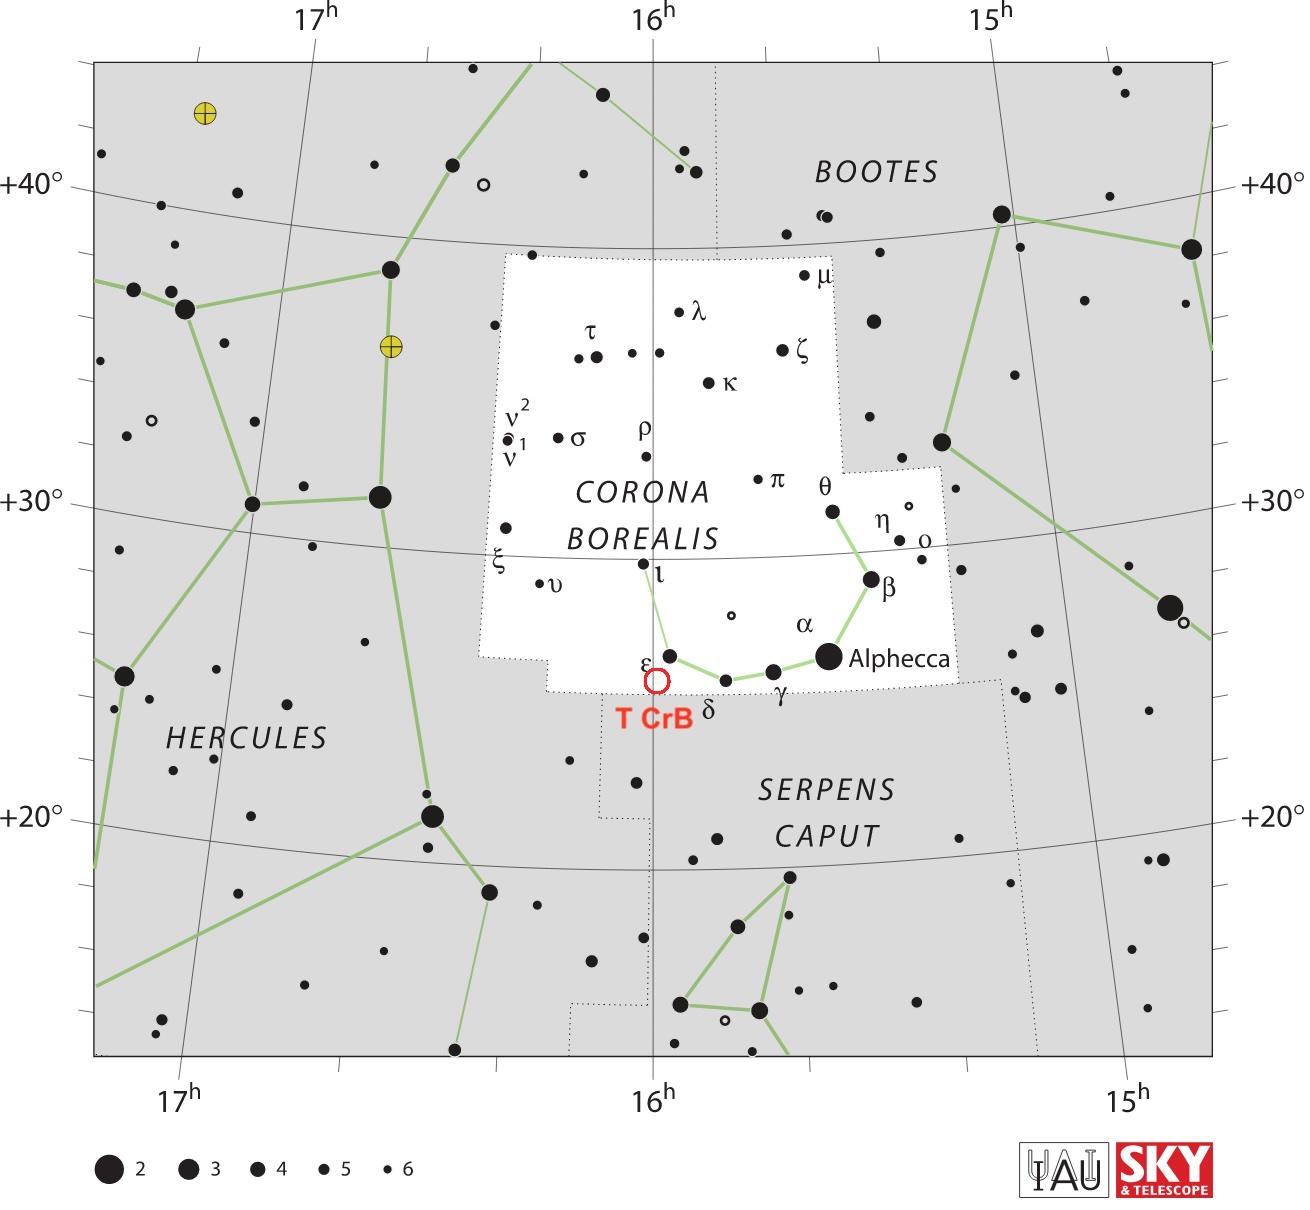 Star chart of Corona Borealis, stars in black on white, with red circle indicating location of star TCrB.